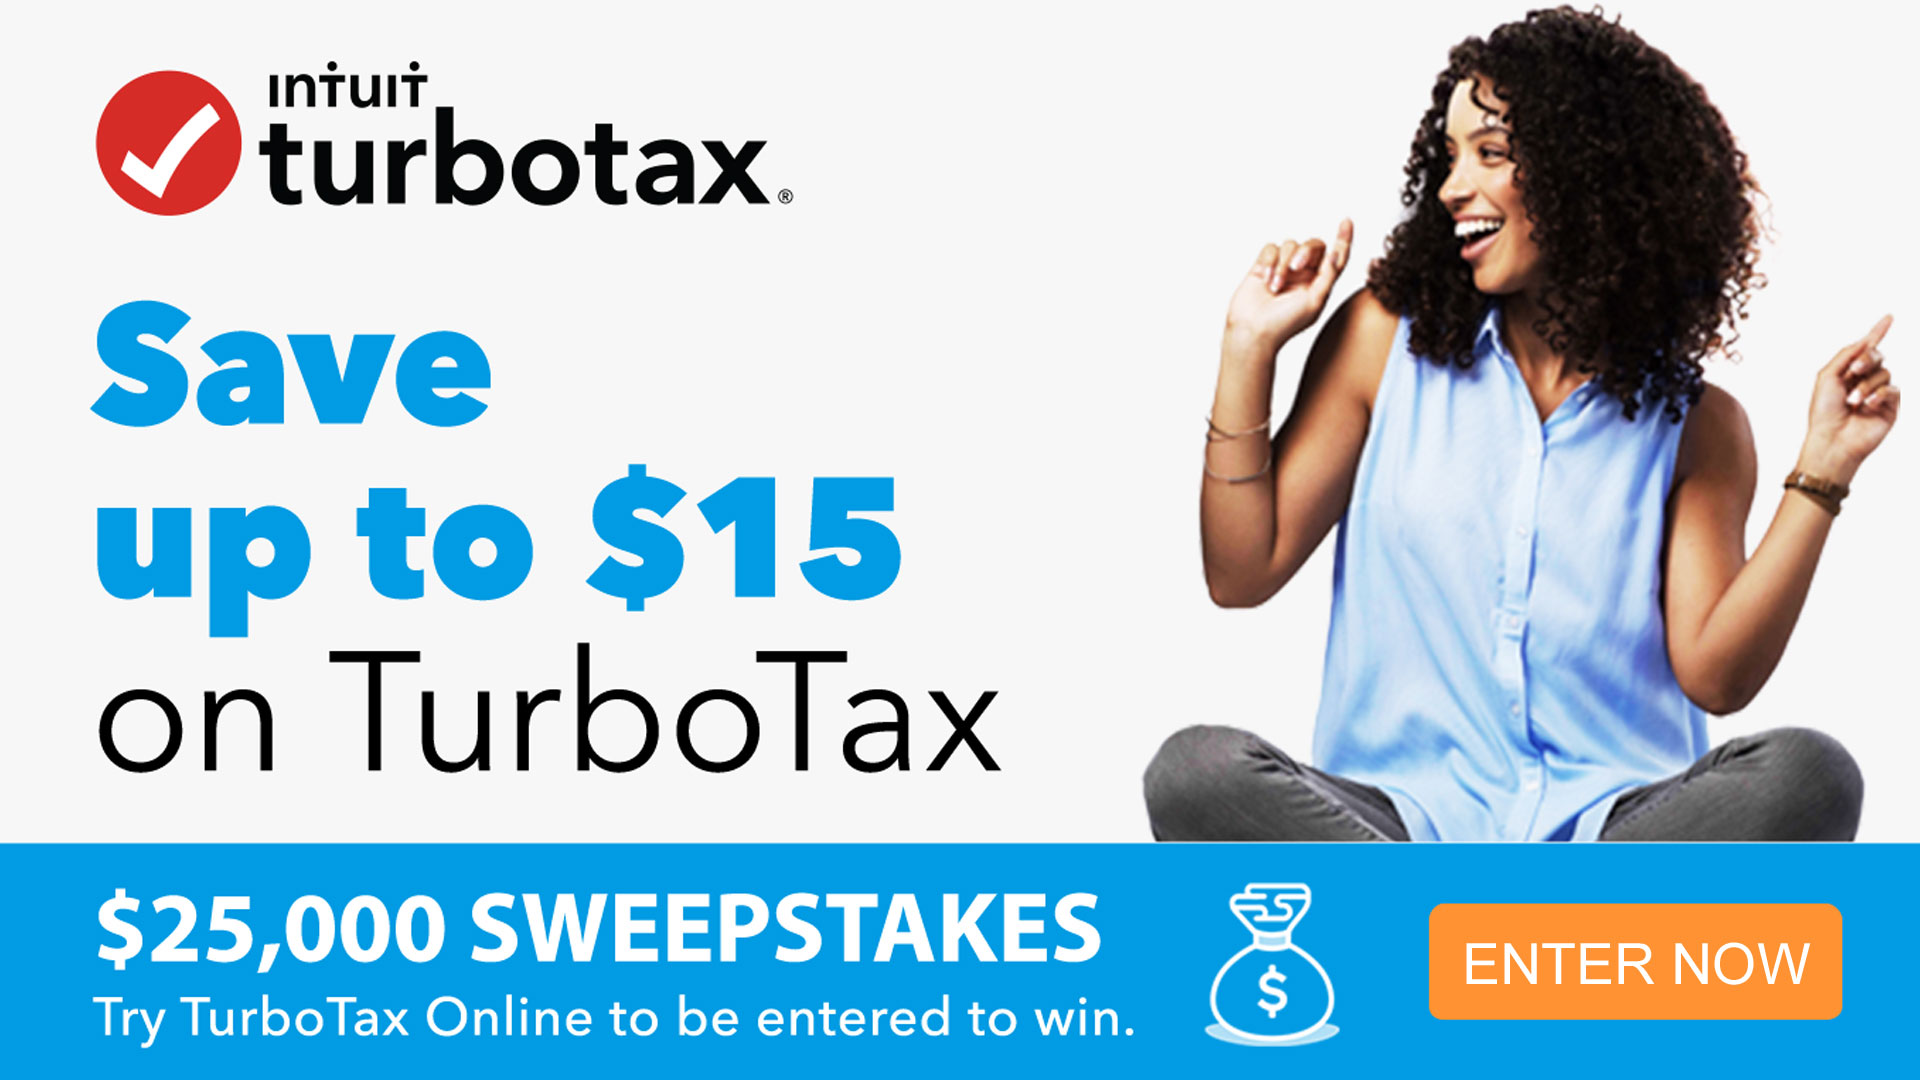 Try TurboTax for FREE and enter a valid email address to be automatically entered for a chance to win $1,000 or $25,000 in cash!